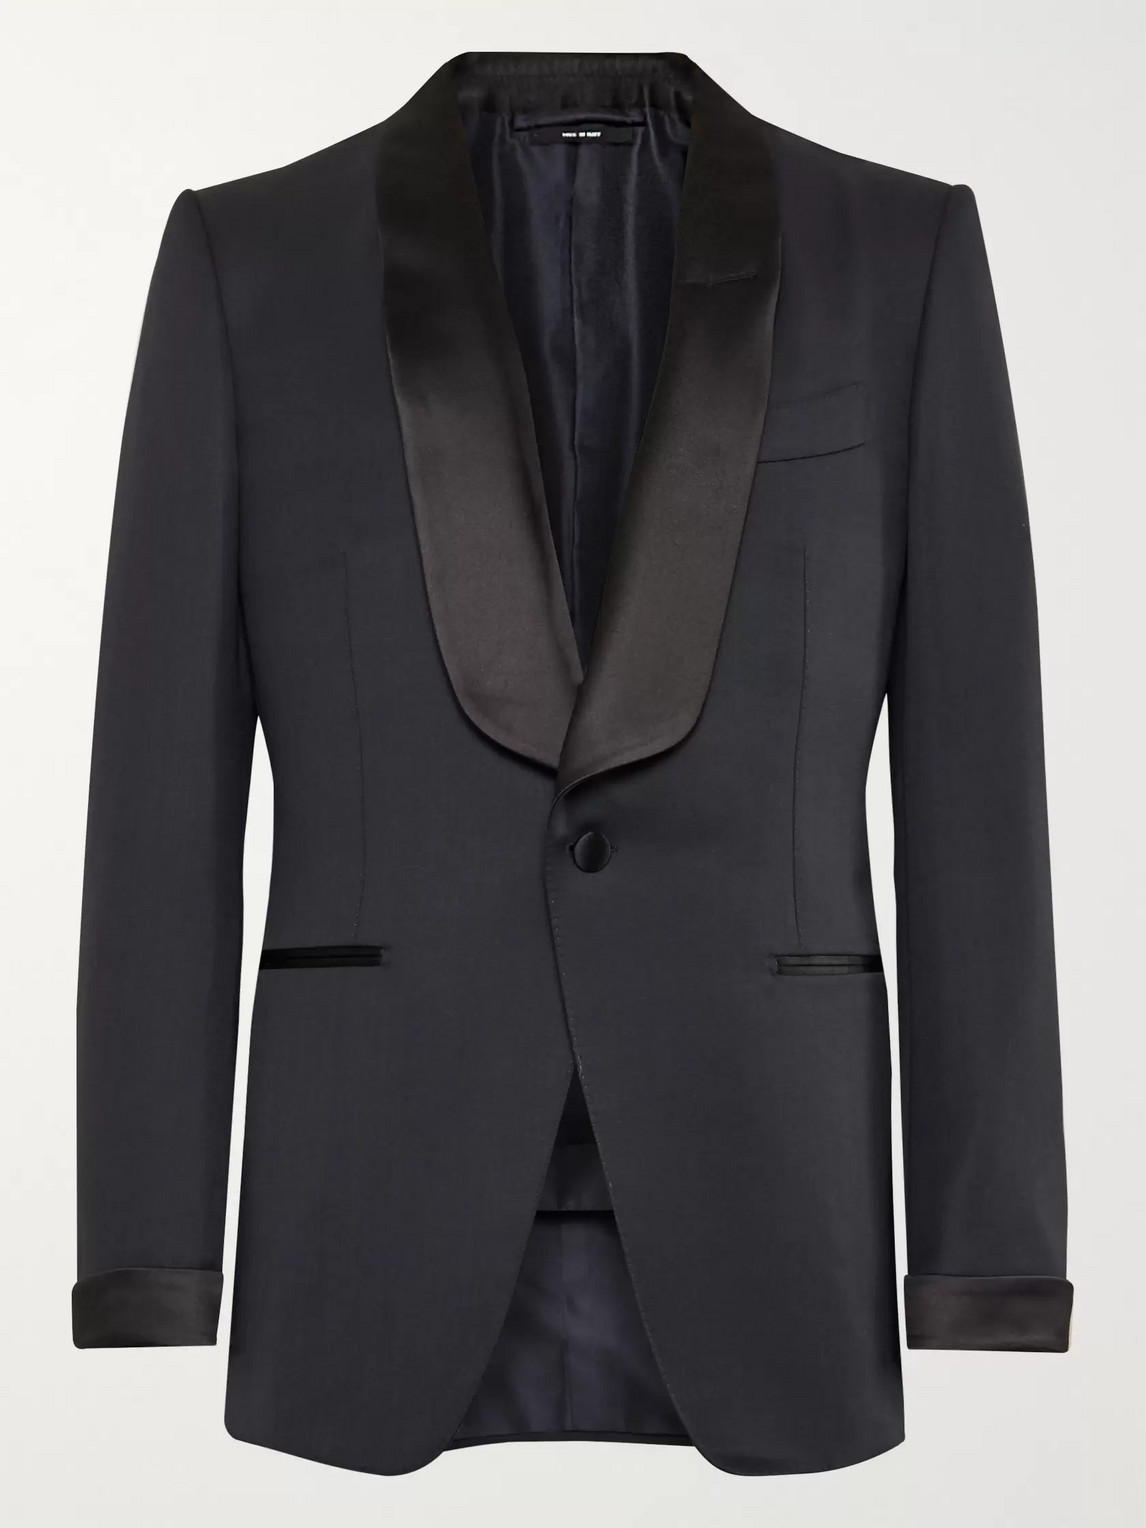 Tom Ford Midnight-blue Satin-trimmed Wool And Mohair-blend Tuxedo Jacket